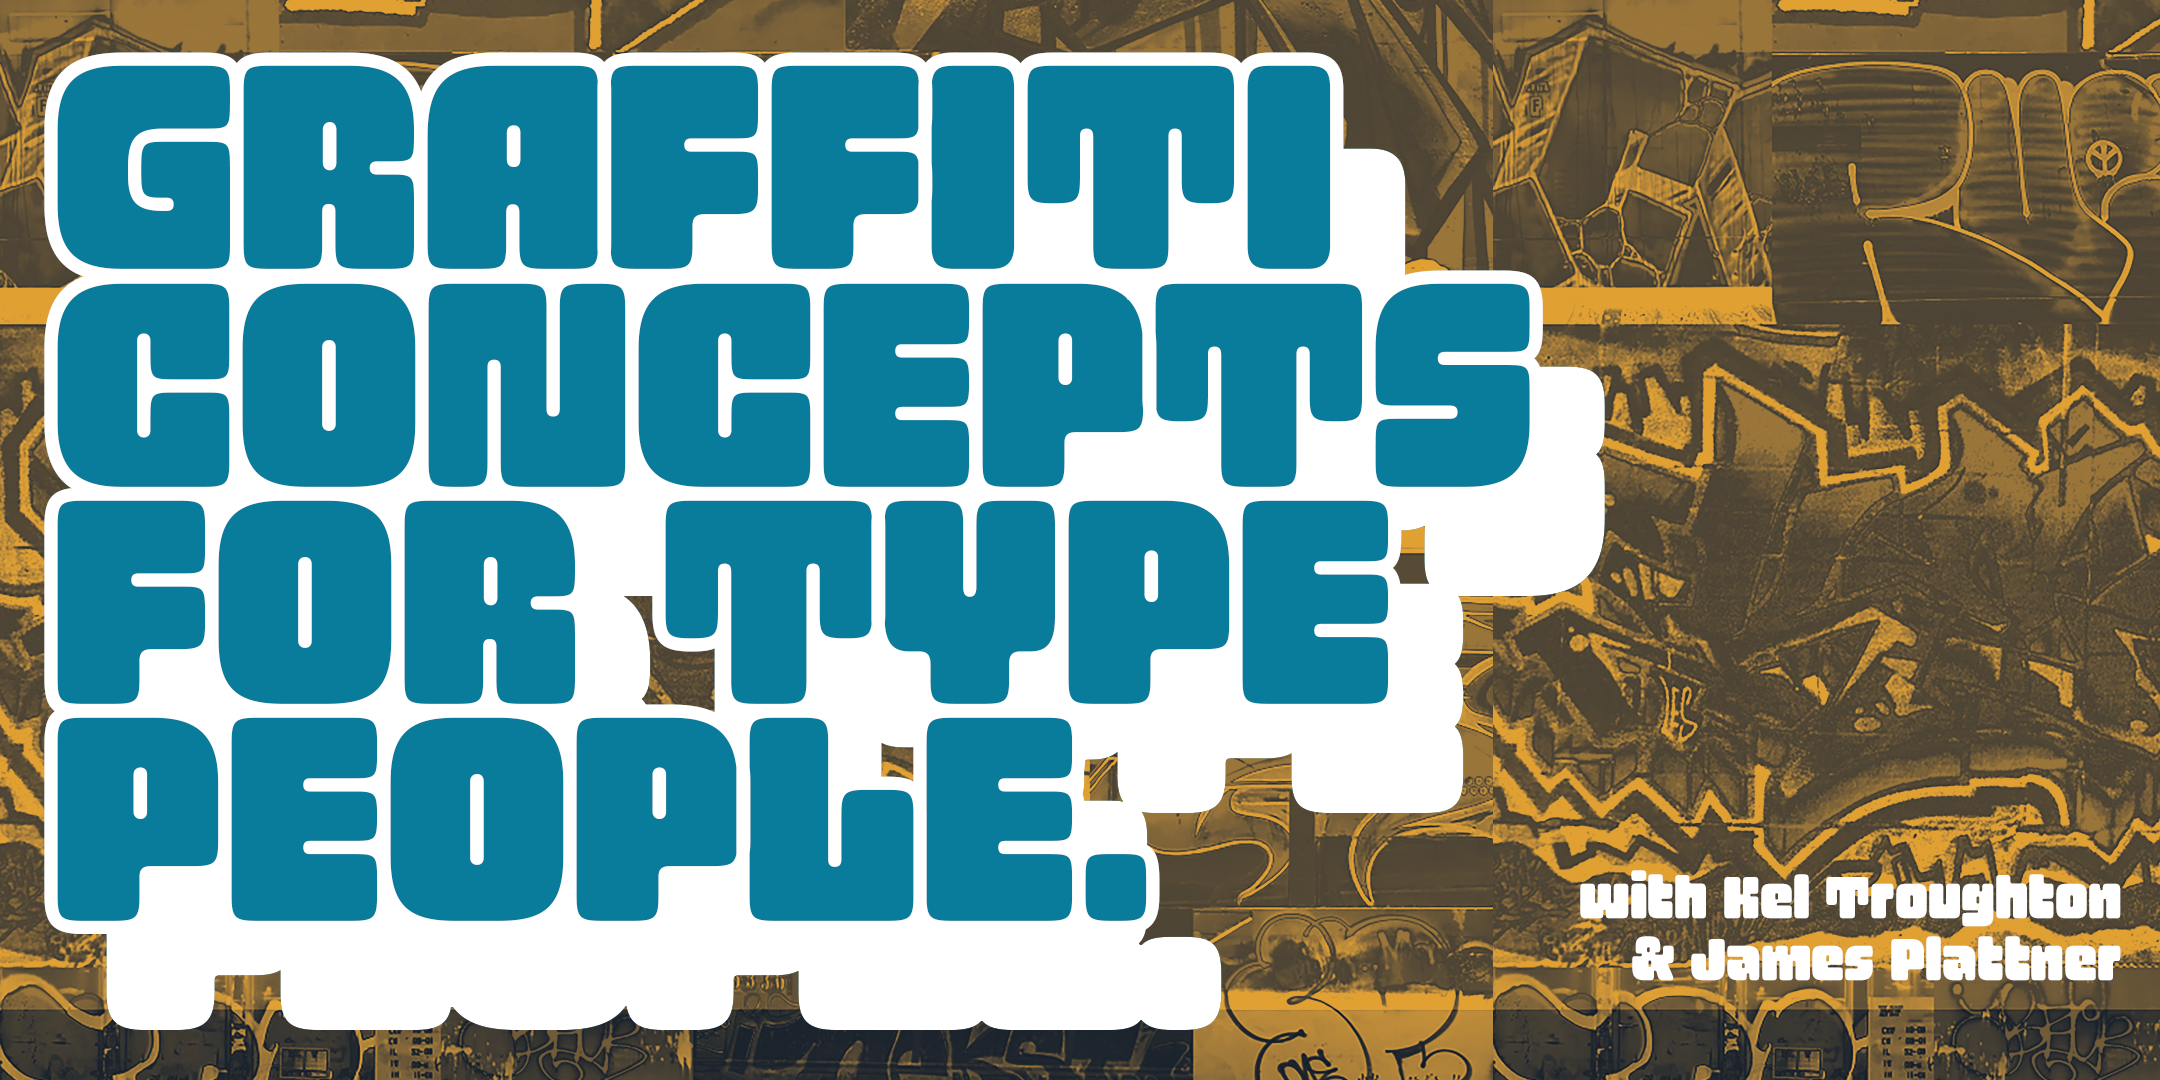 Teal Blue letters rendered on yellow background with graffiti images. Text reads 'Graffiti Concepts for Type People'